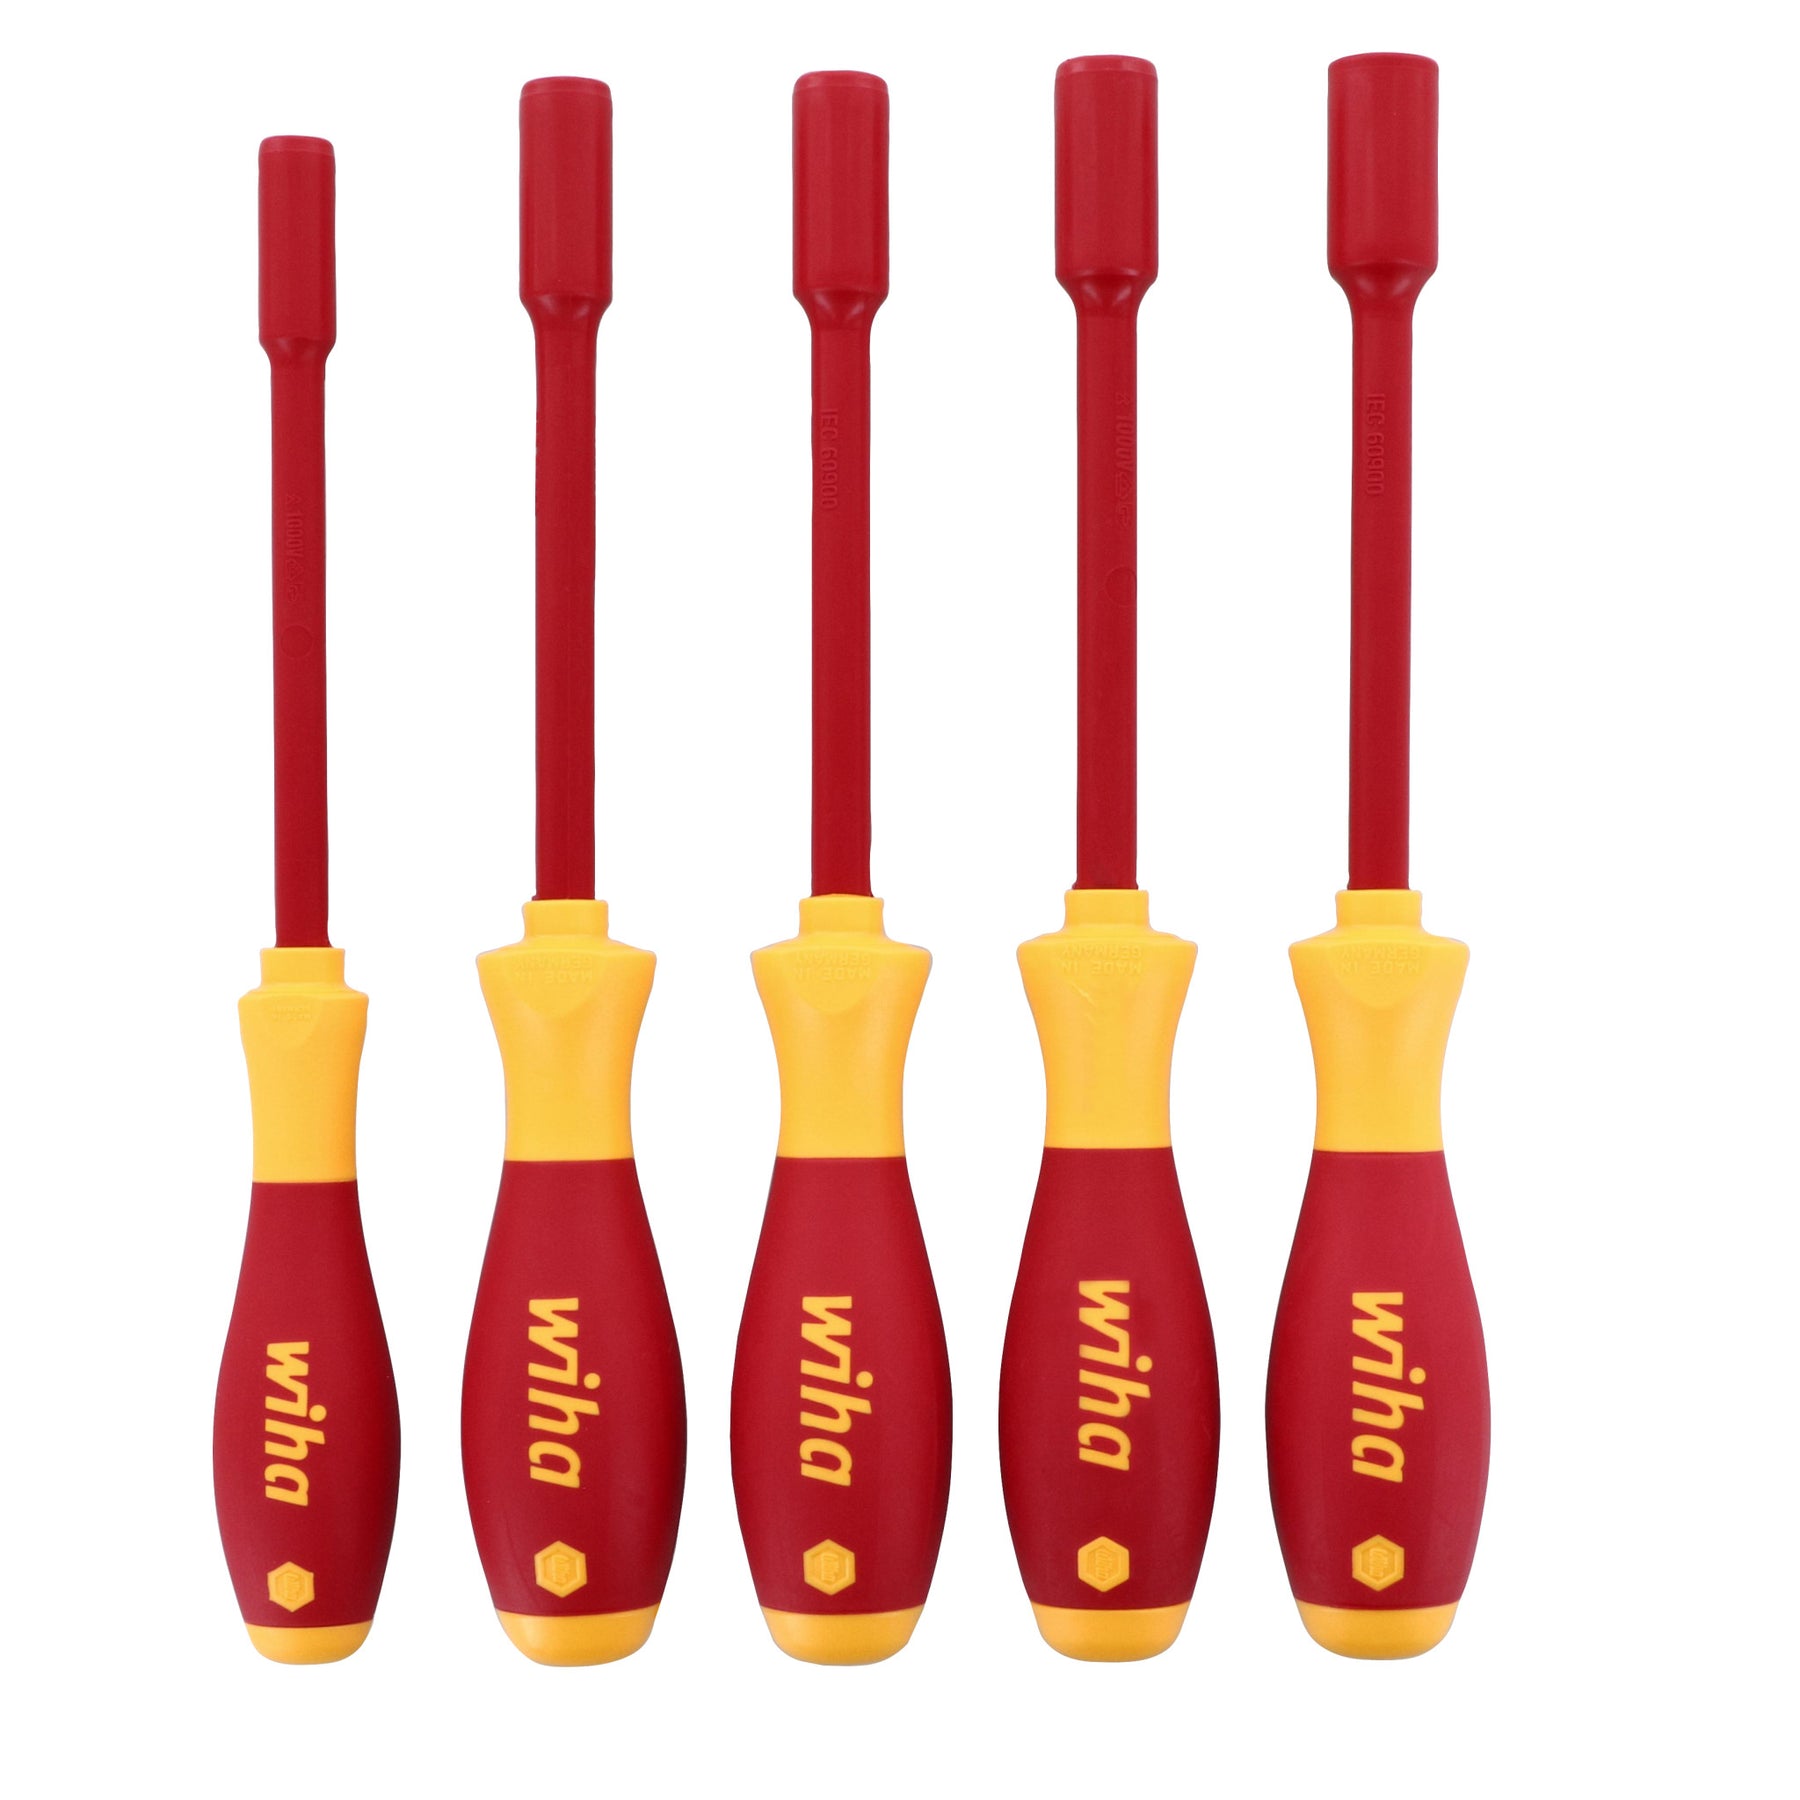 5 Piece Insulated SoftFinish Nut Driver Set - Metric